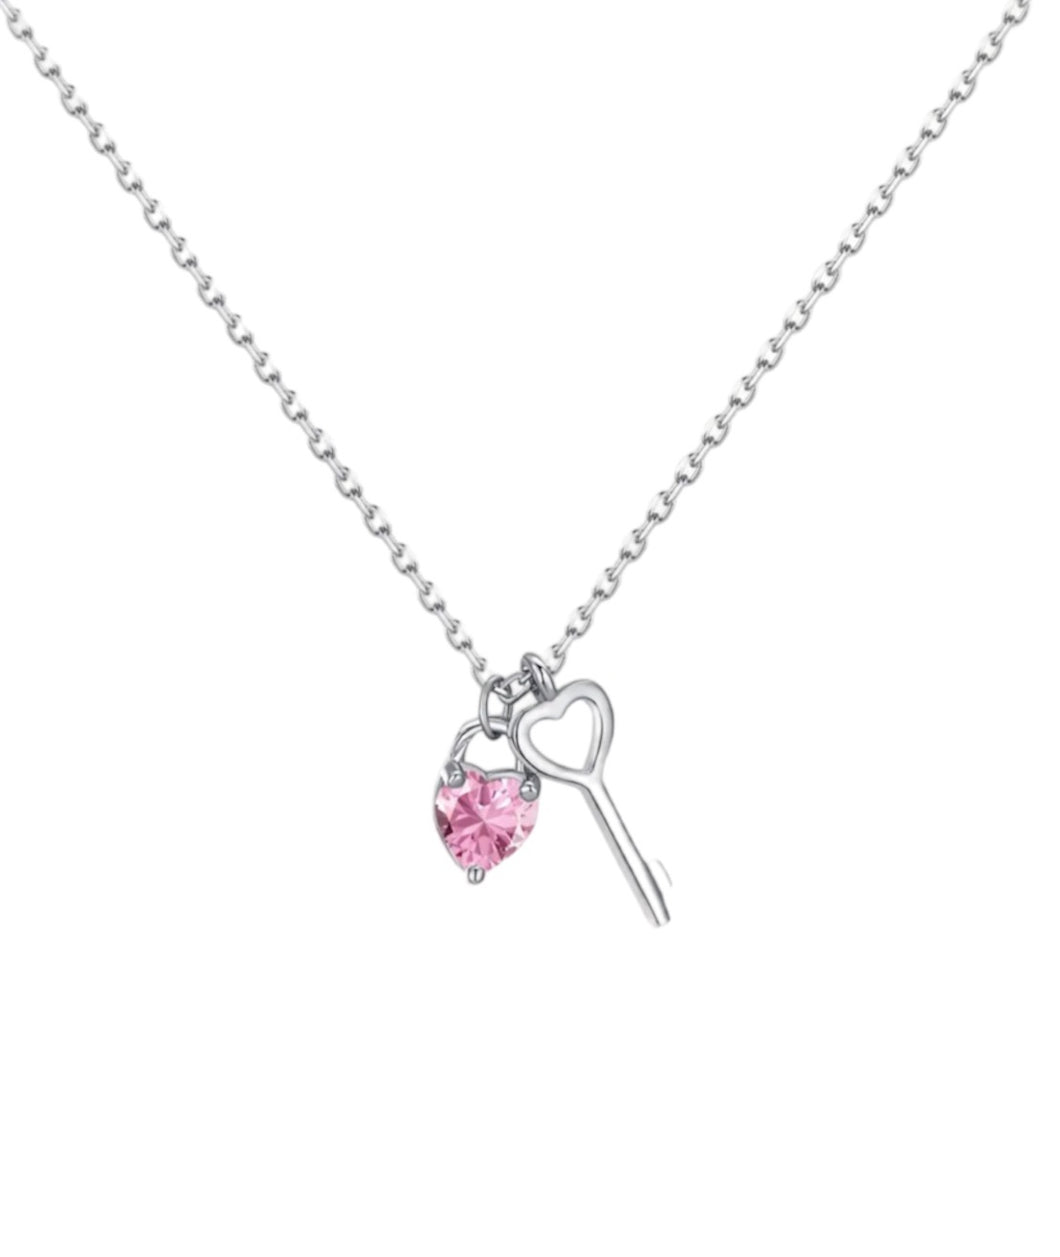 HEART WITH KEY PURE STERLING SILVER NECKLACE